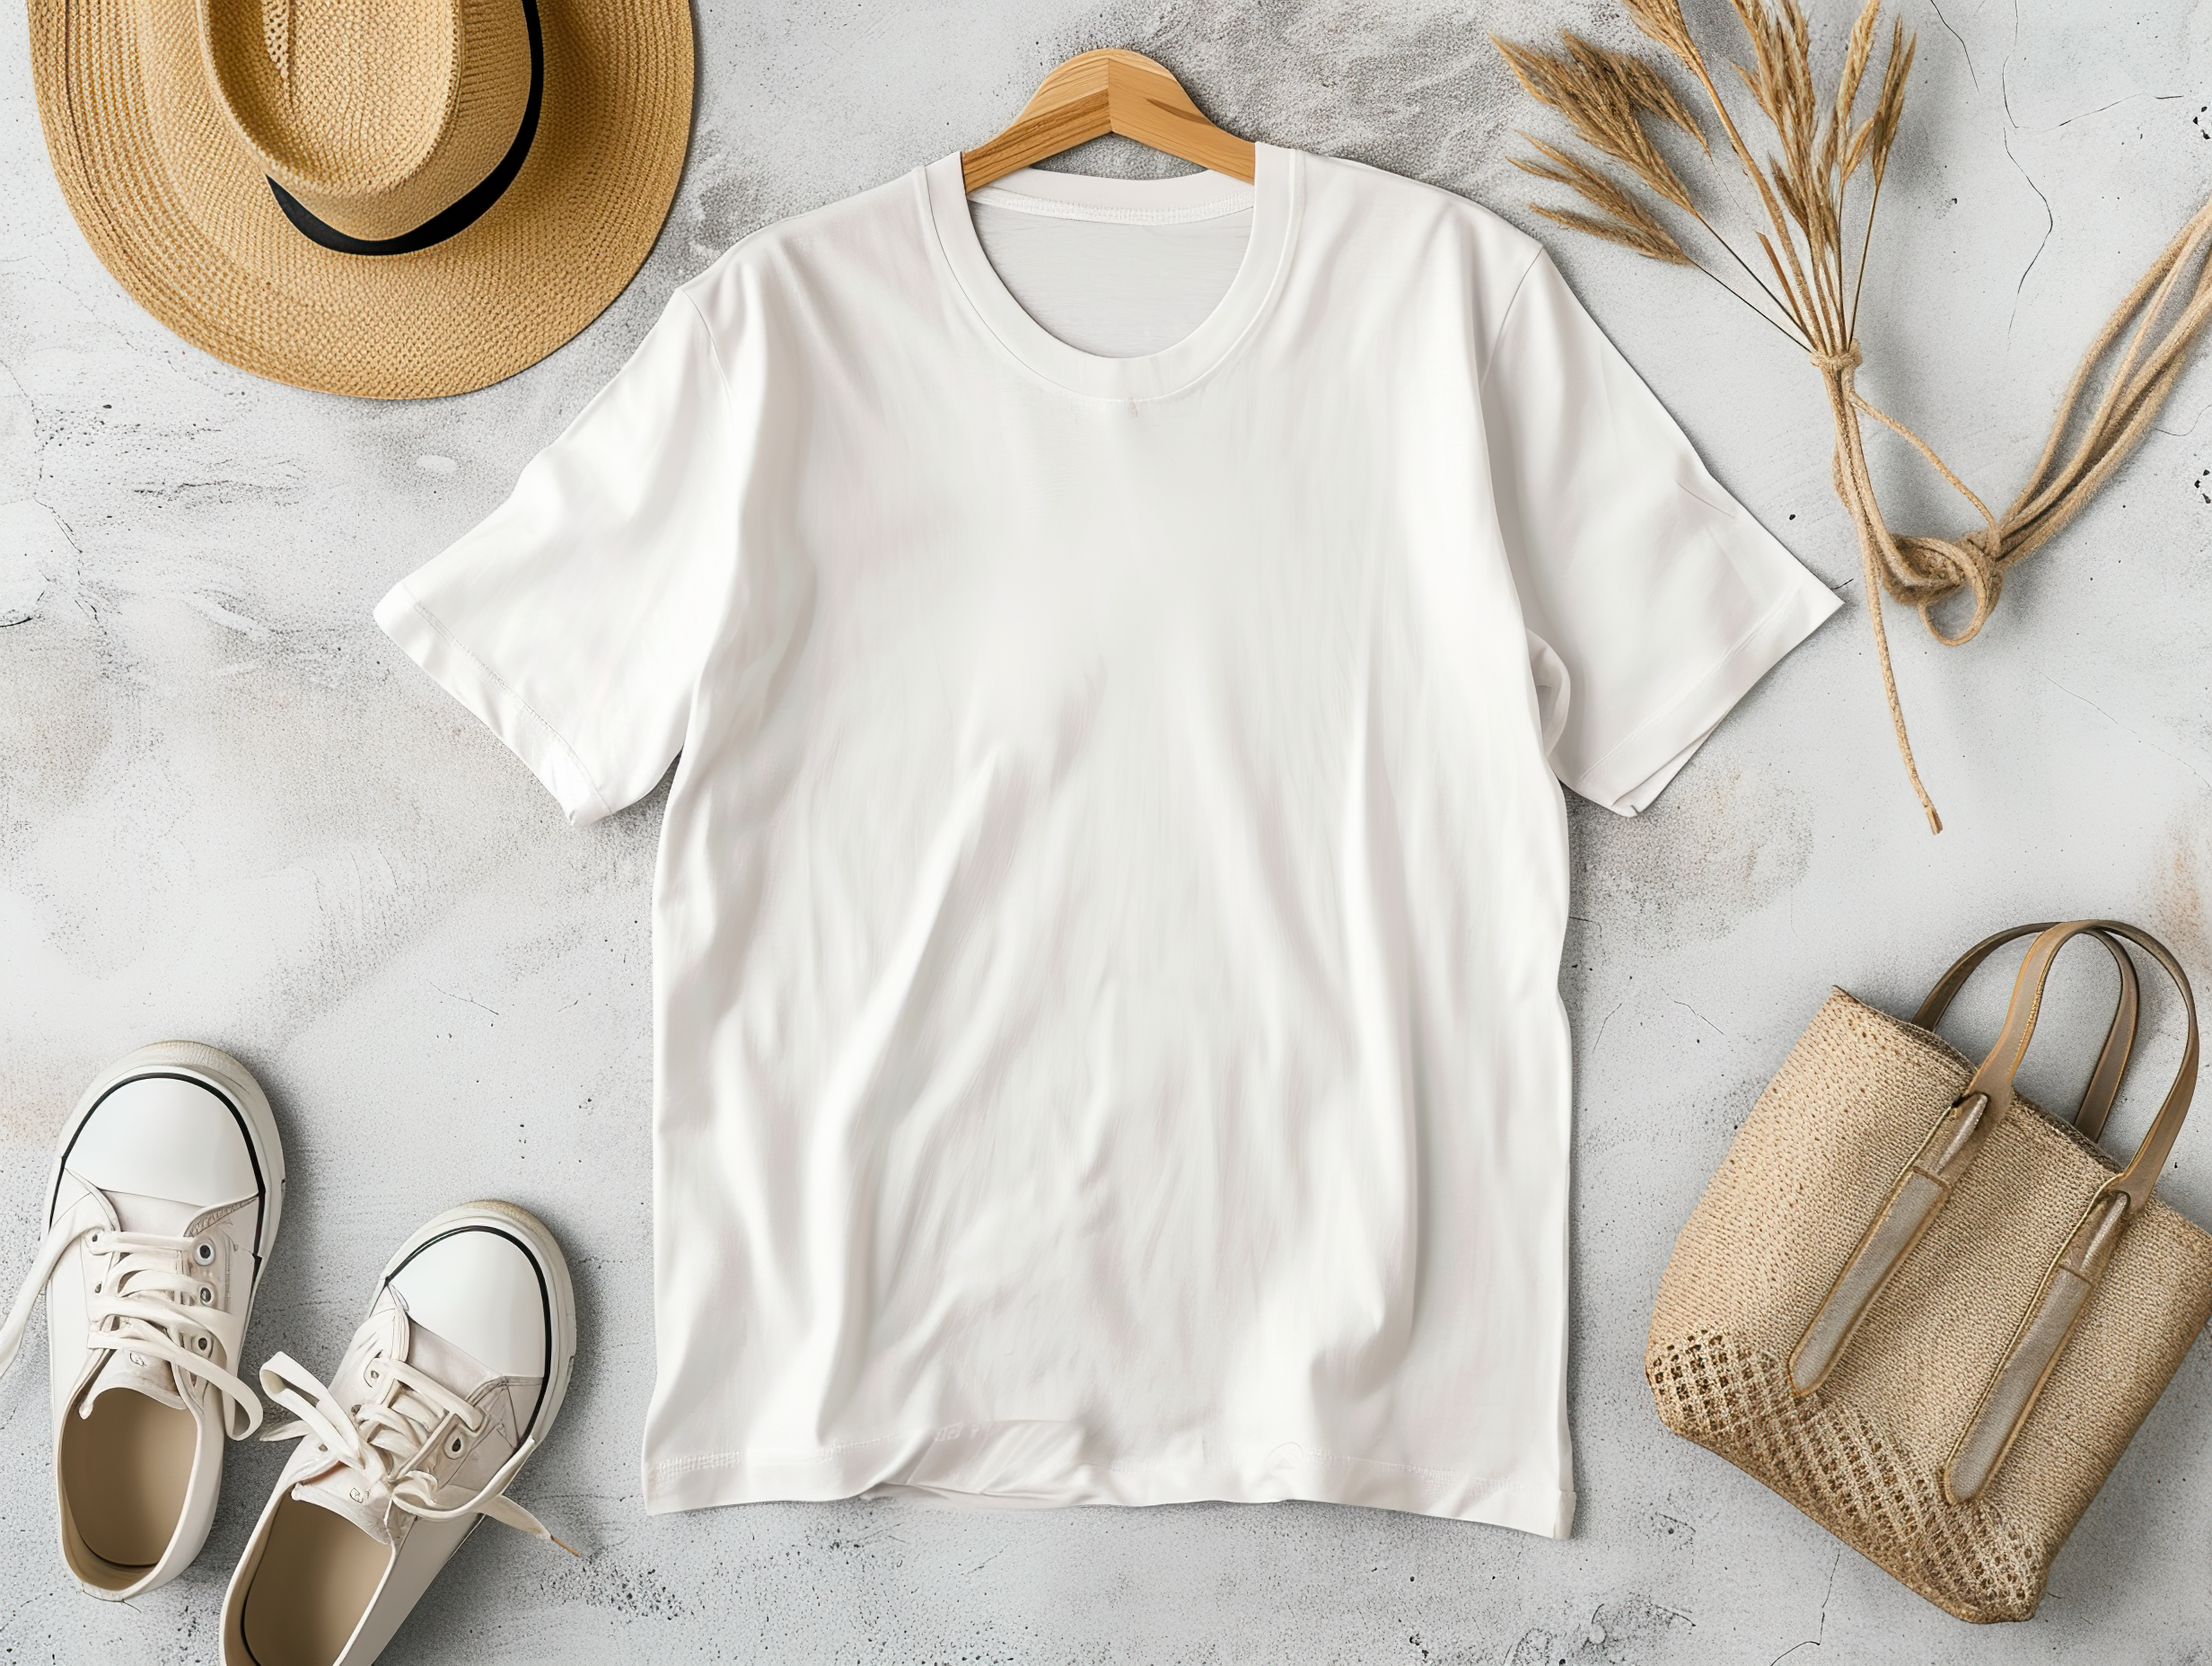 Stylish t-shirt, bag and sneakers on white background